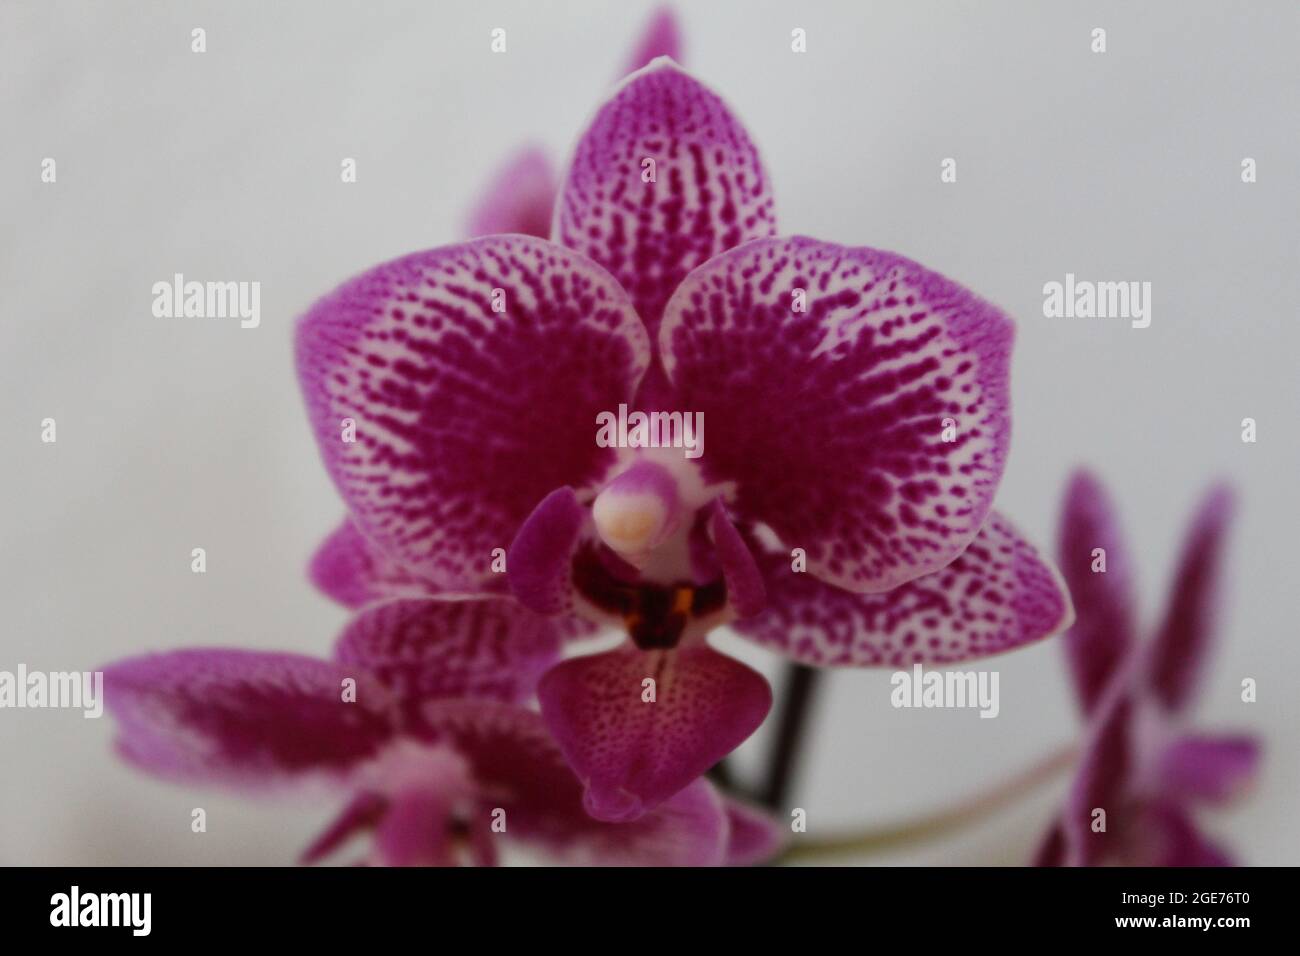 It's an orchid. Stock Photo